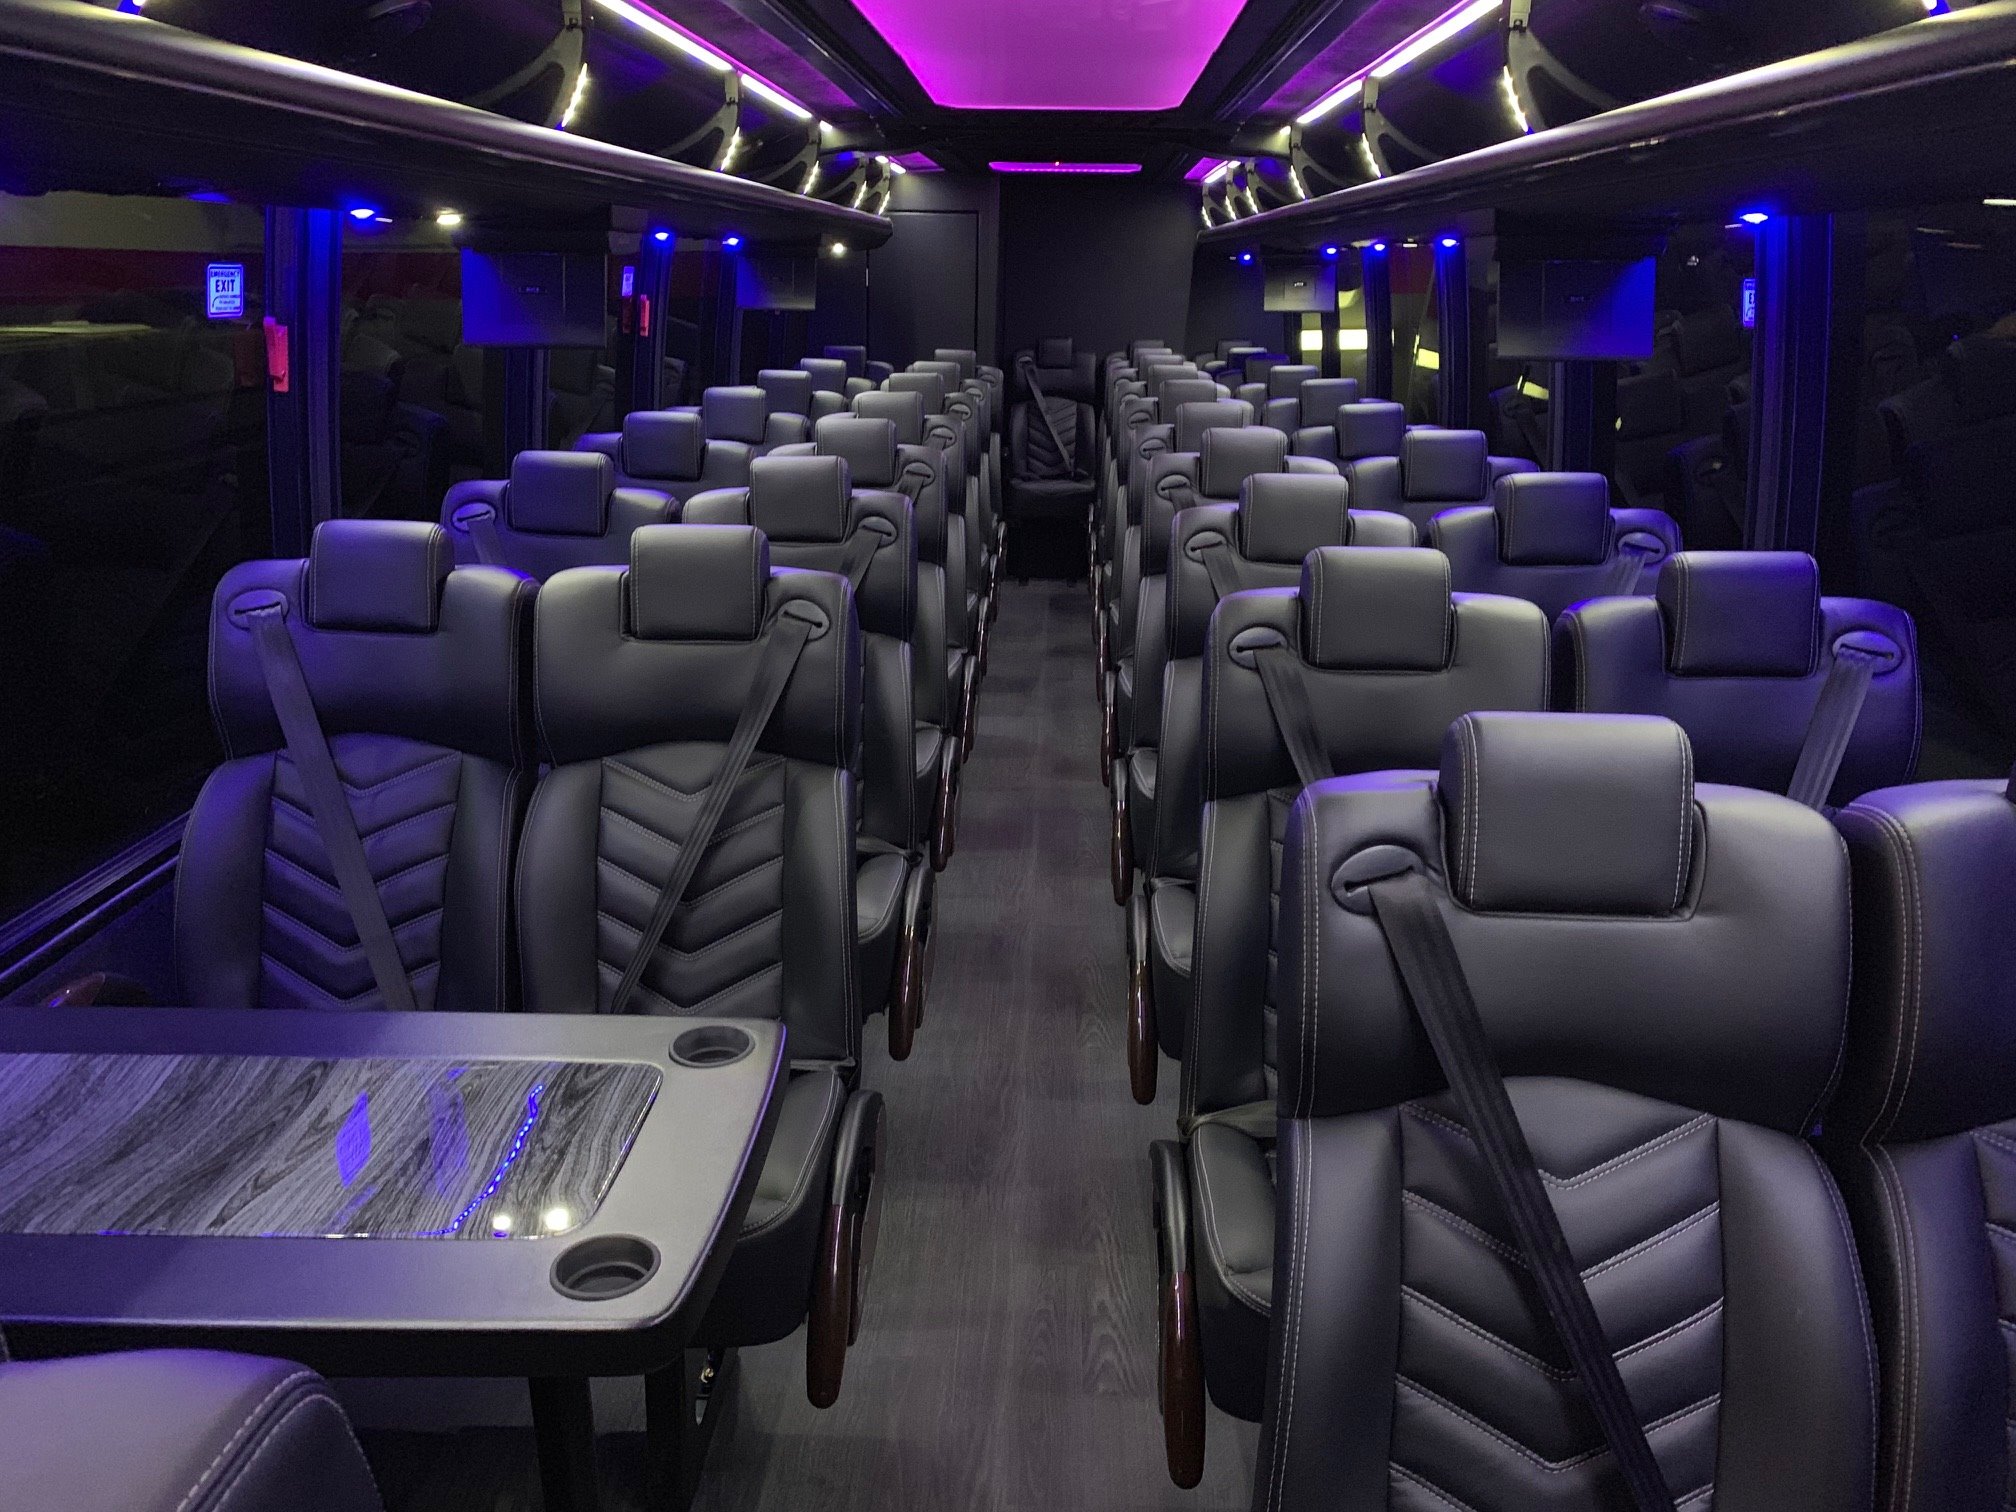 Charter Buses, Limo's, Transportation Services | Albany & Schenectady, NY